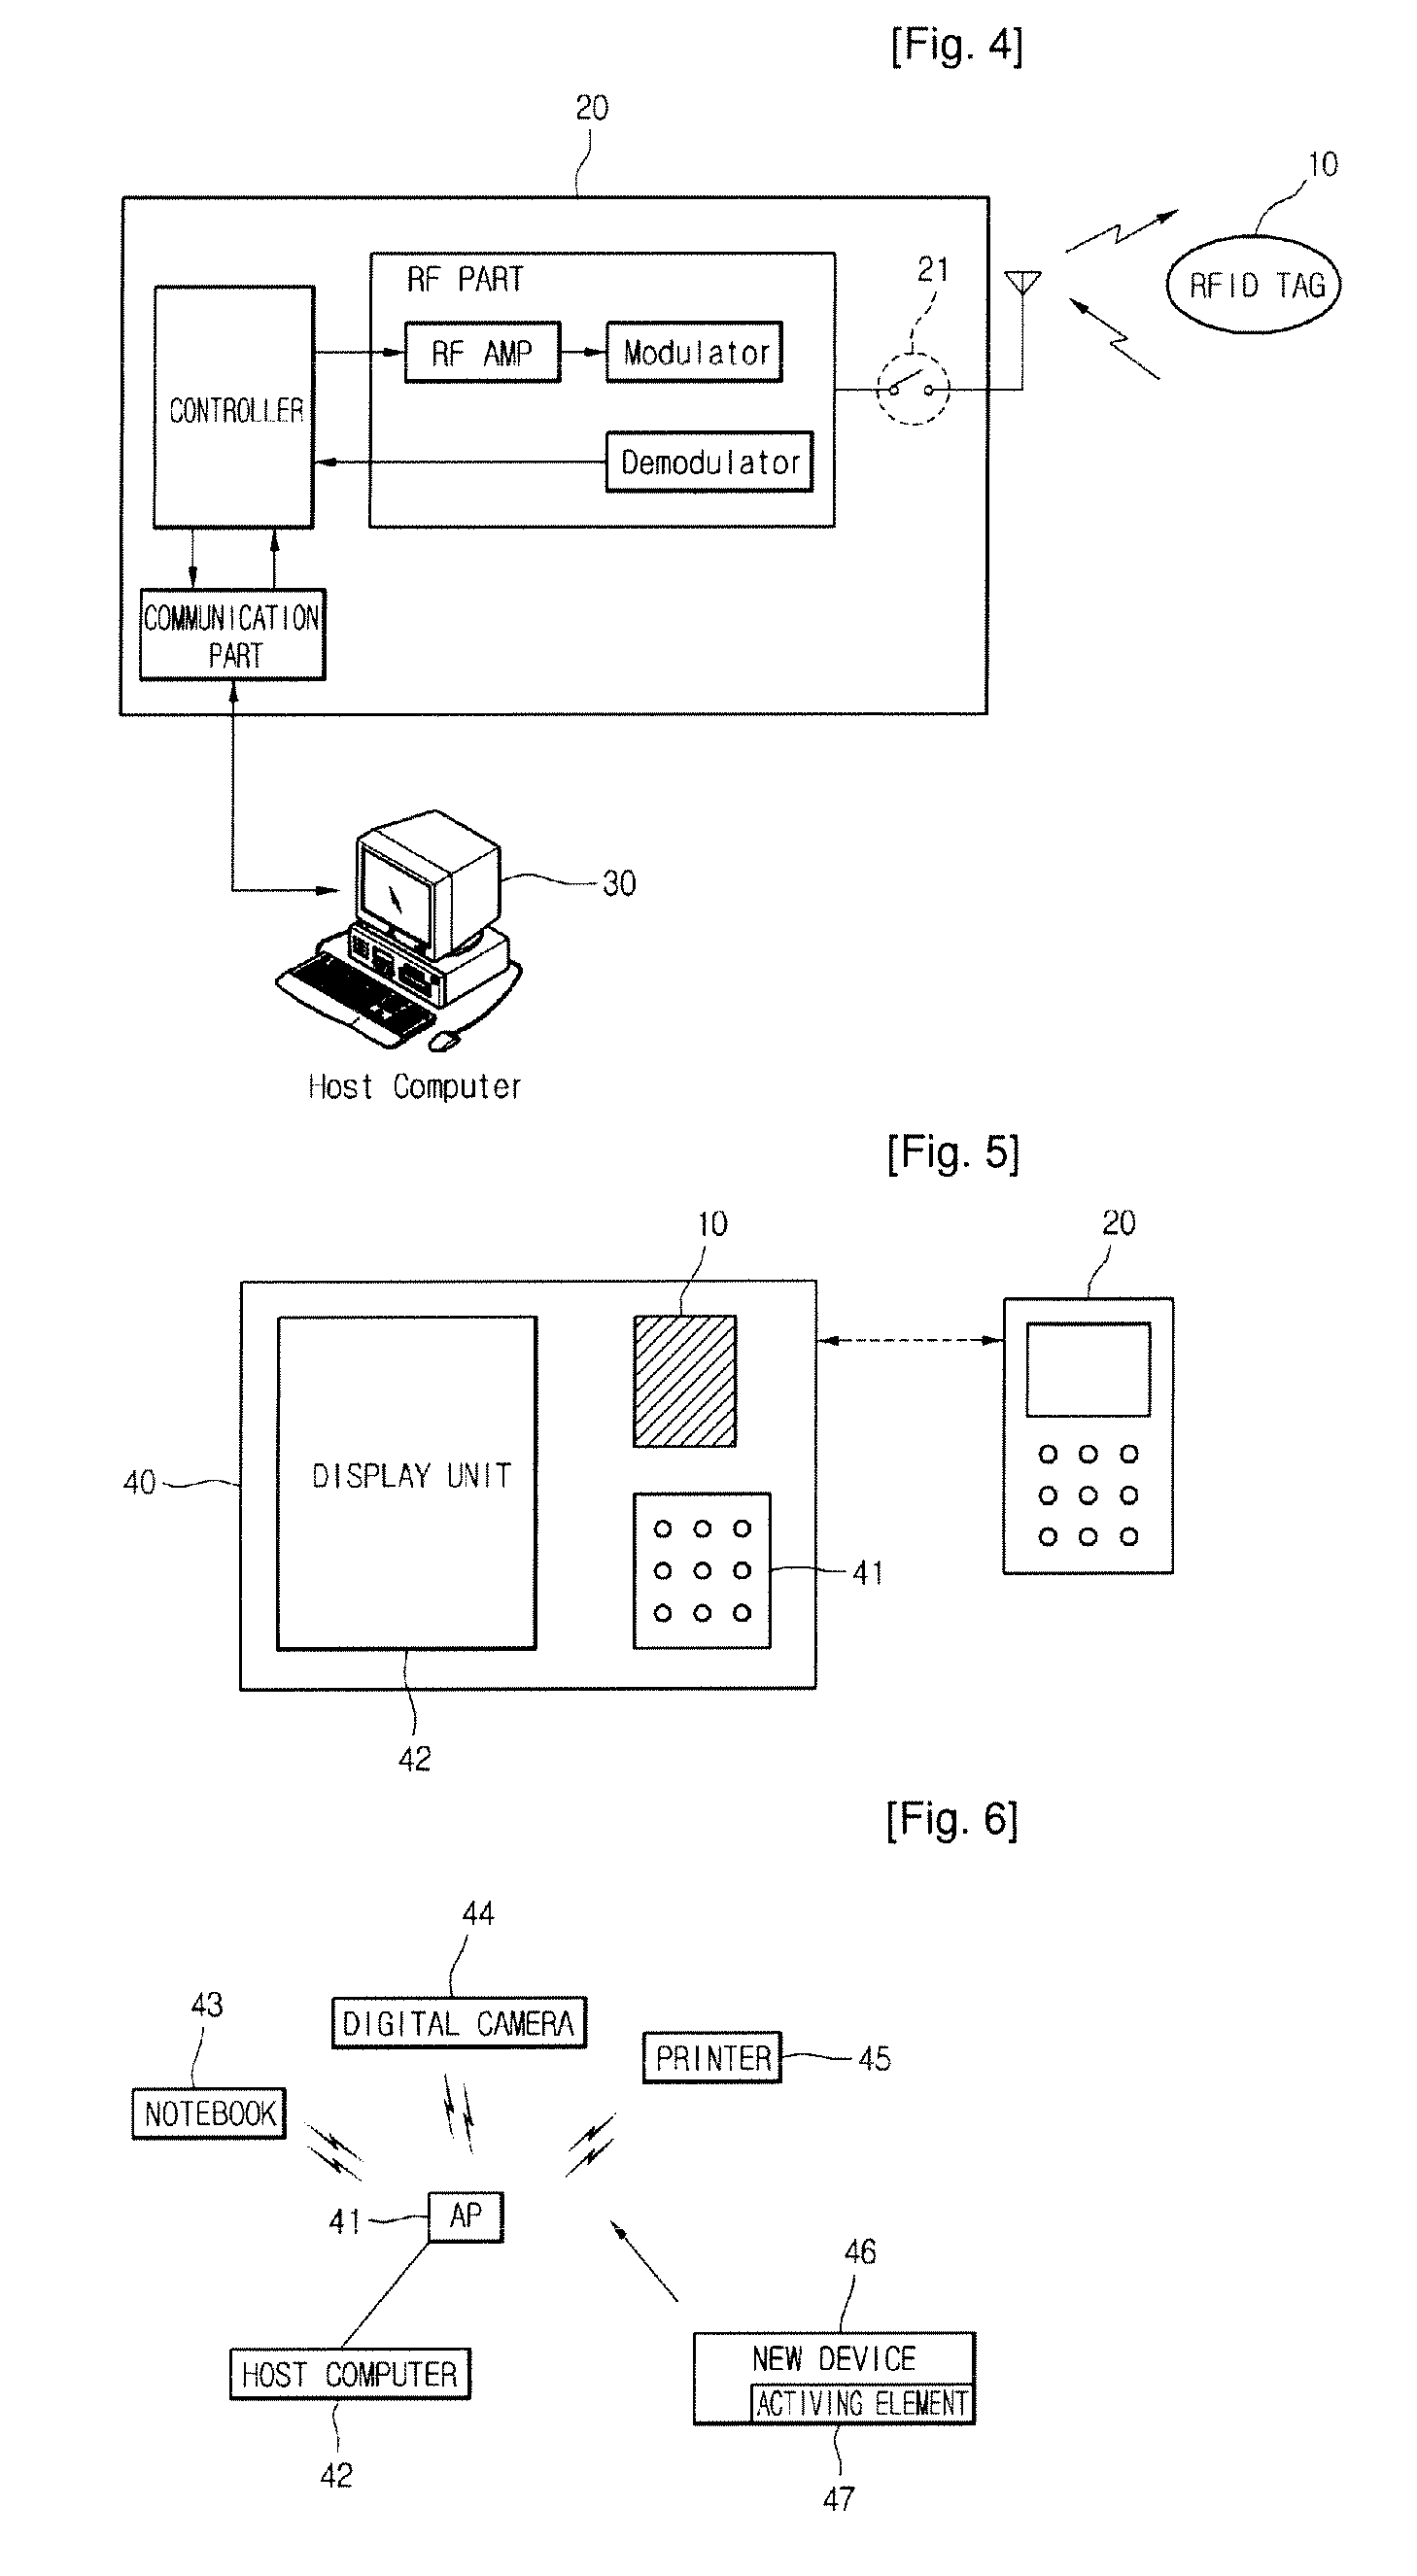 Apparatus and method for action control of RFID system